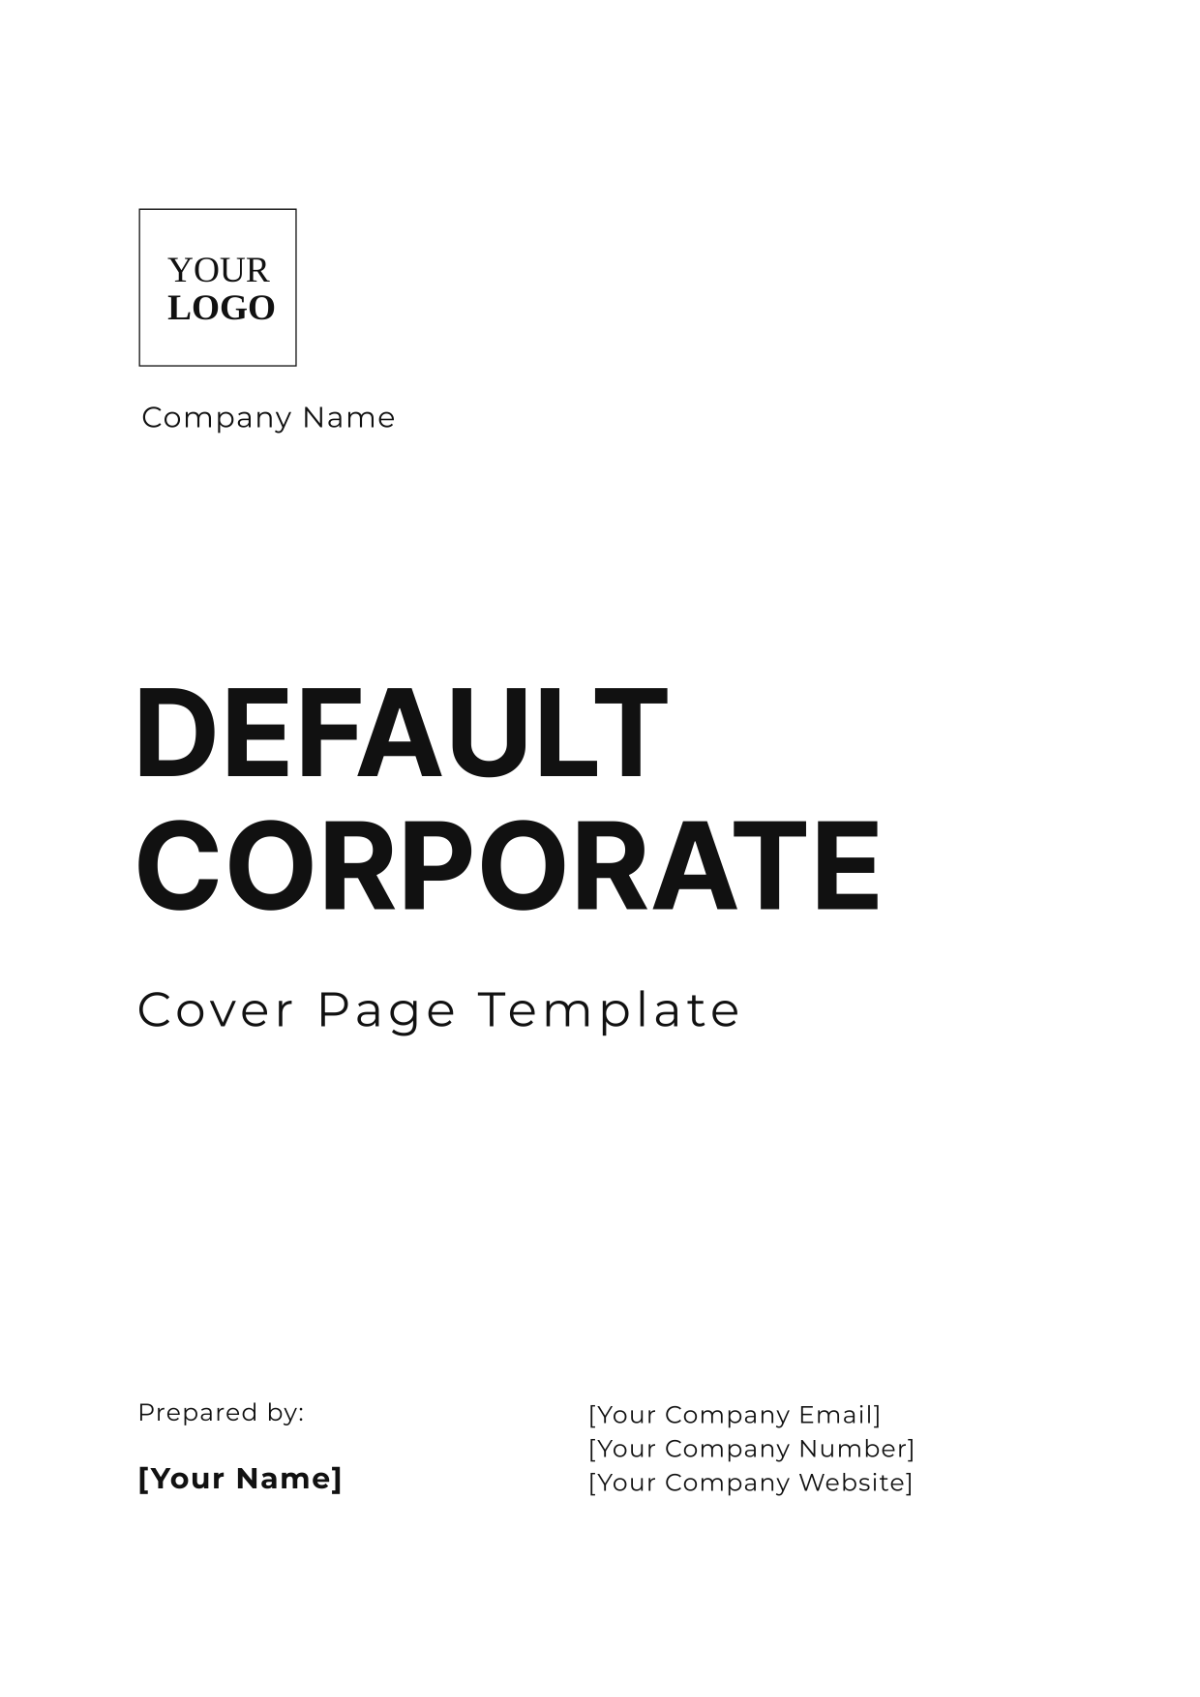 Default Business Cover Page